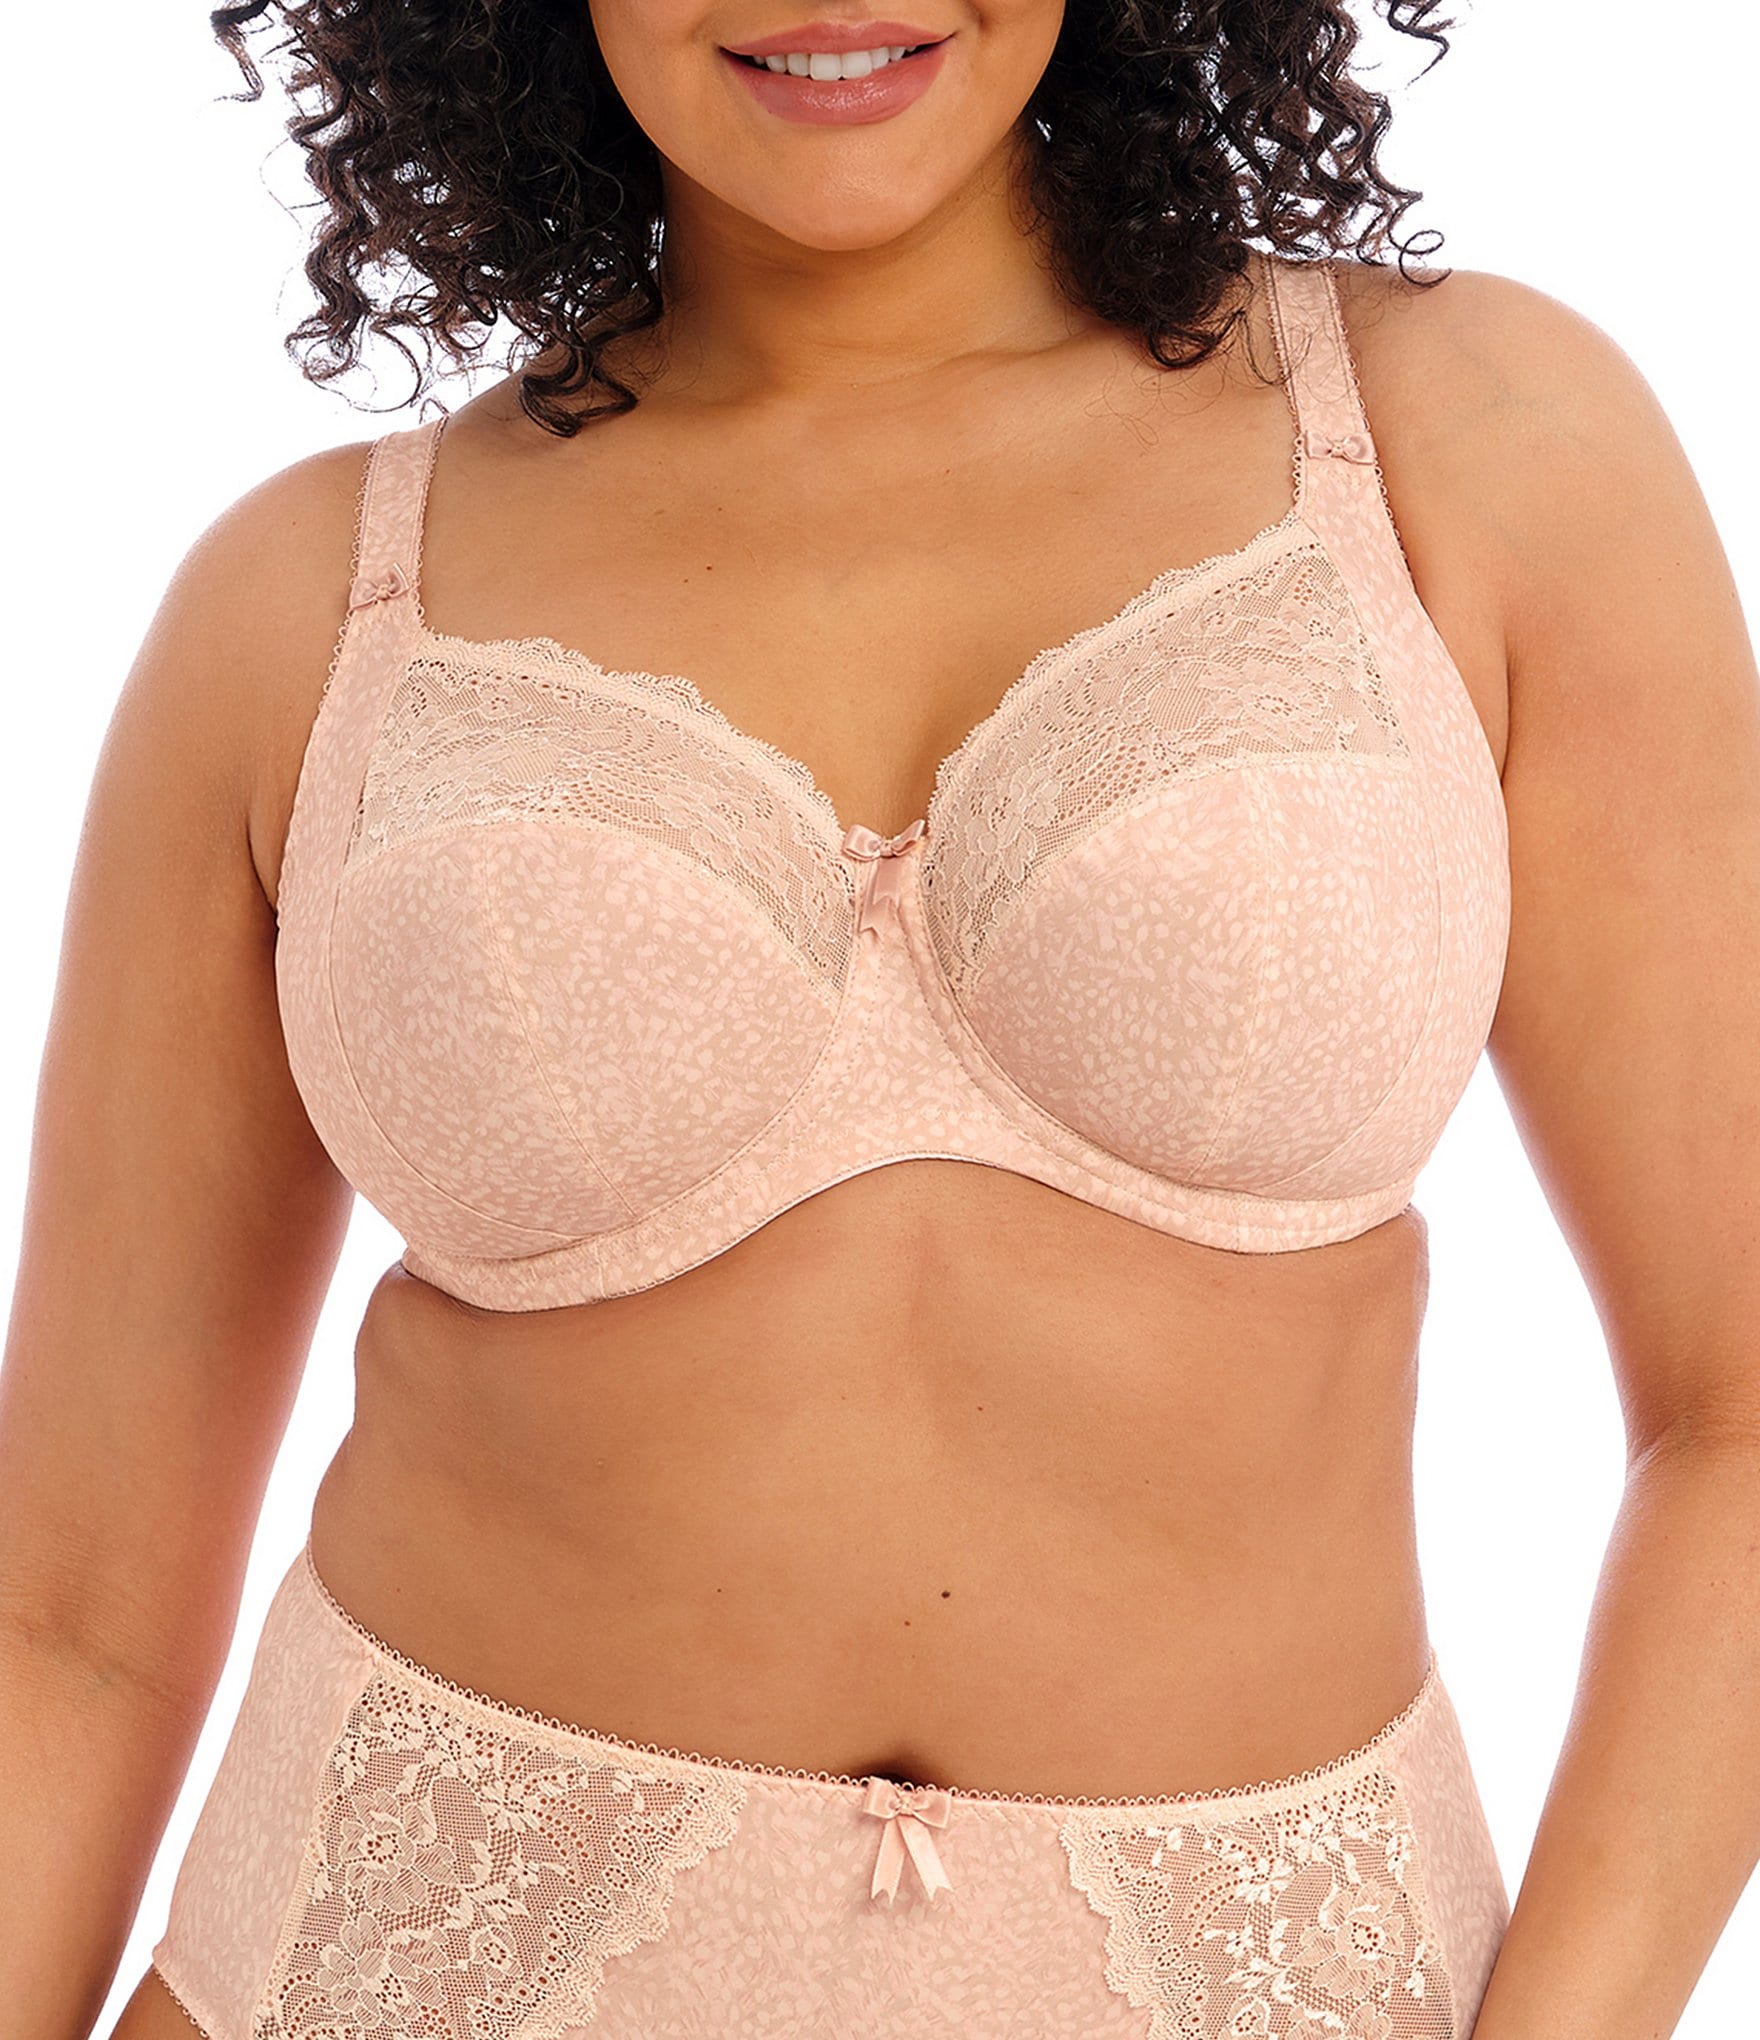 strap on: Bras: Push Ups, Lace & Strapless